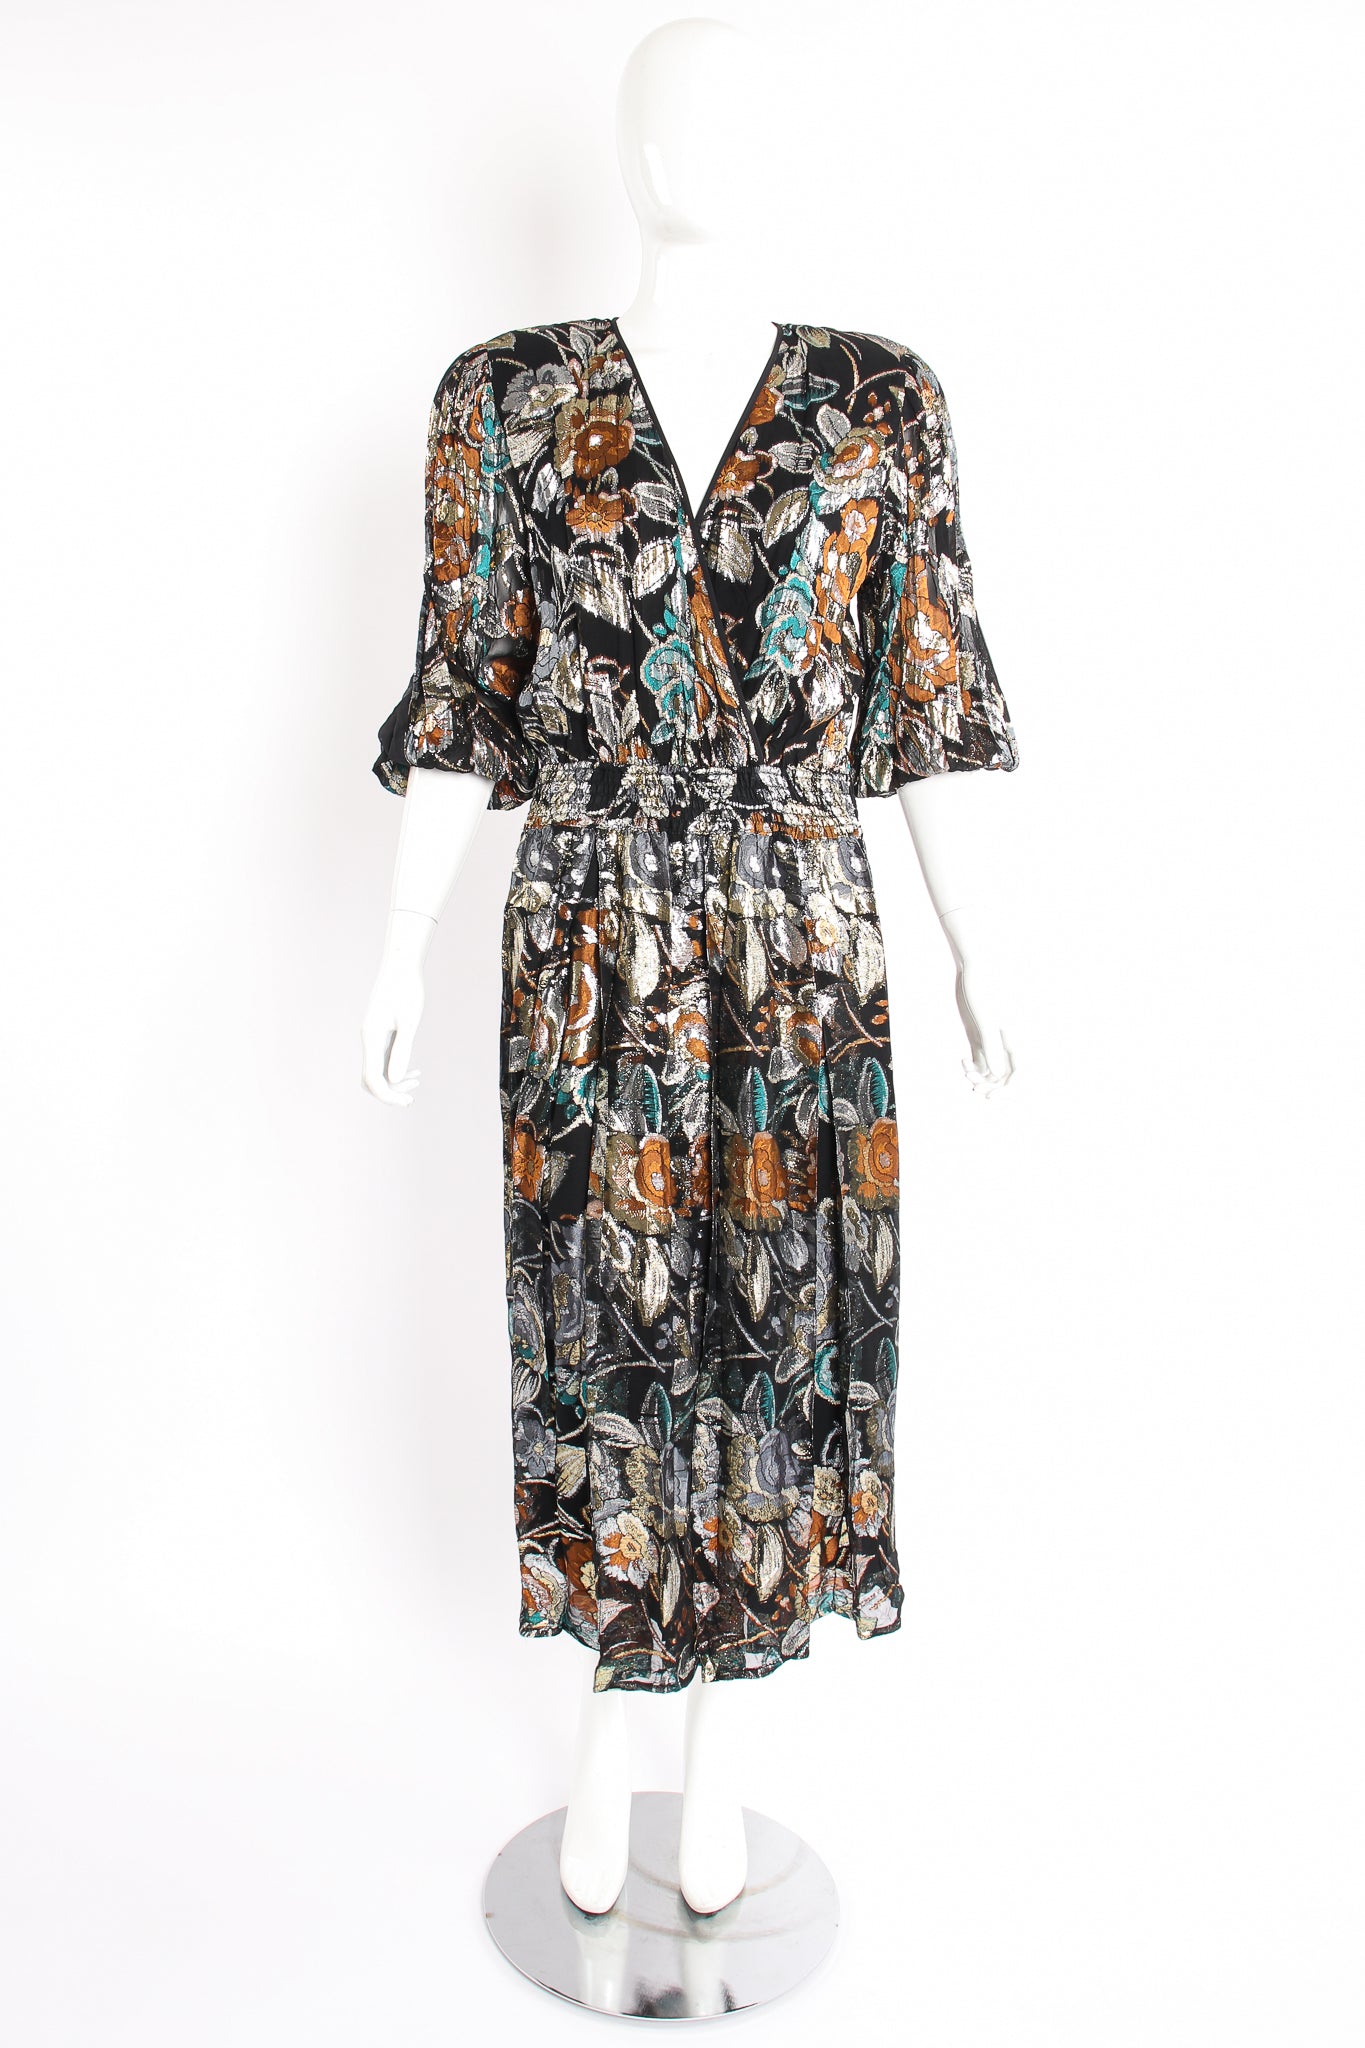 Vintage Diane Freis Floral Brocaded Chiffon Dress on Mannequin front at Recess Los Angeles